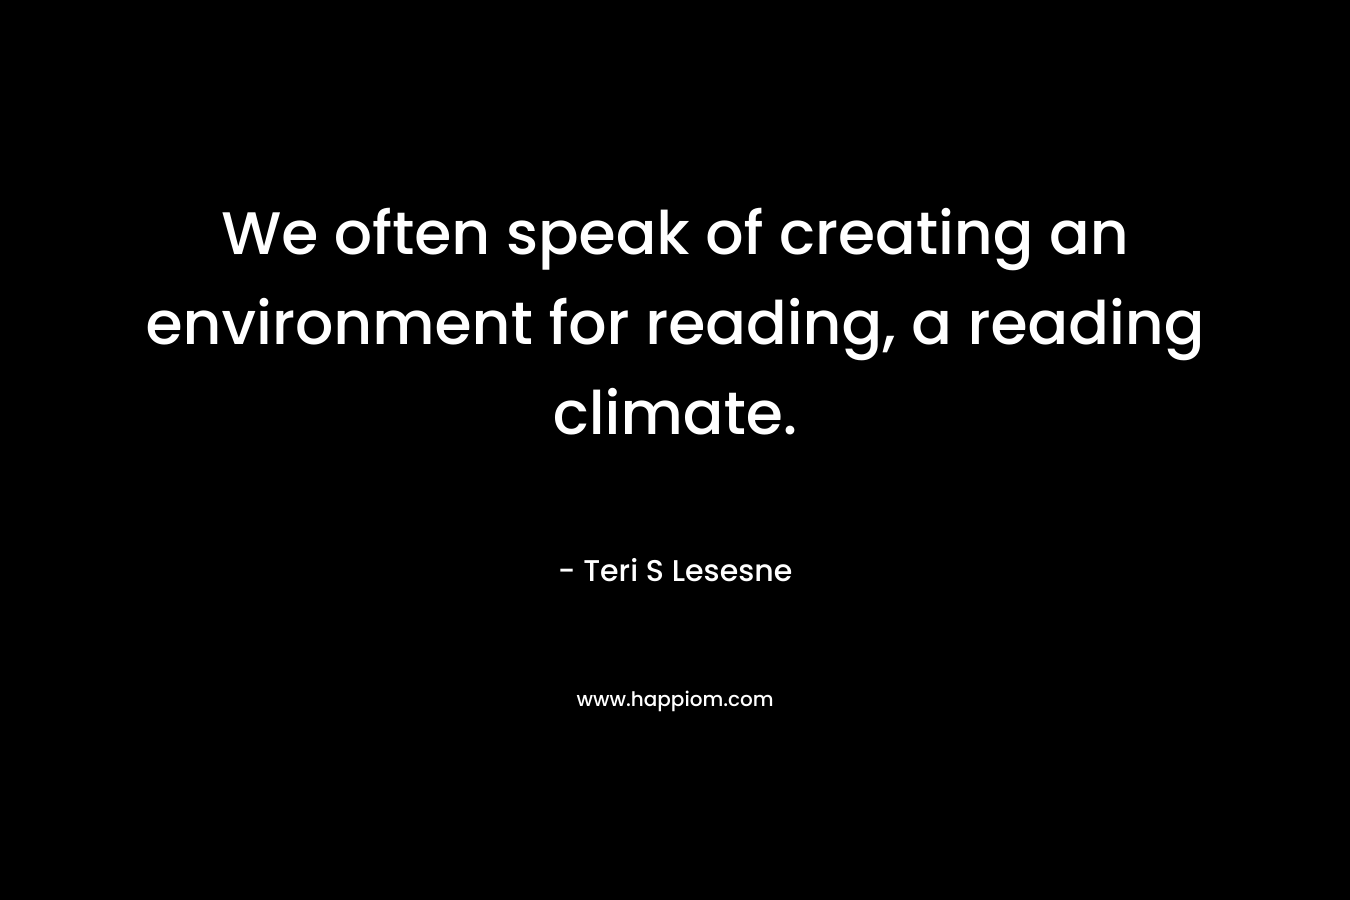 We often speak of creating an environment for reading, a reading climate.